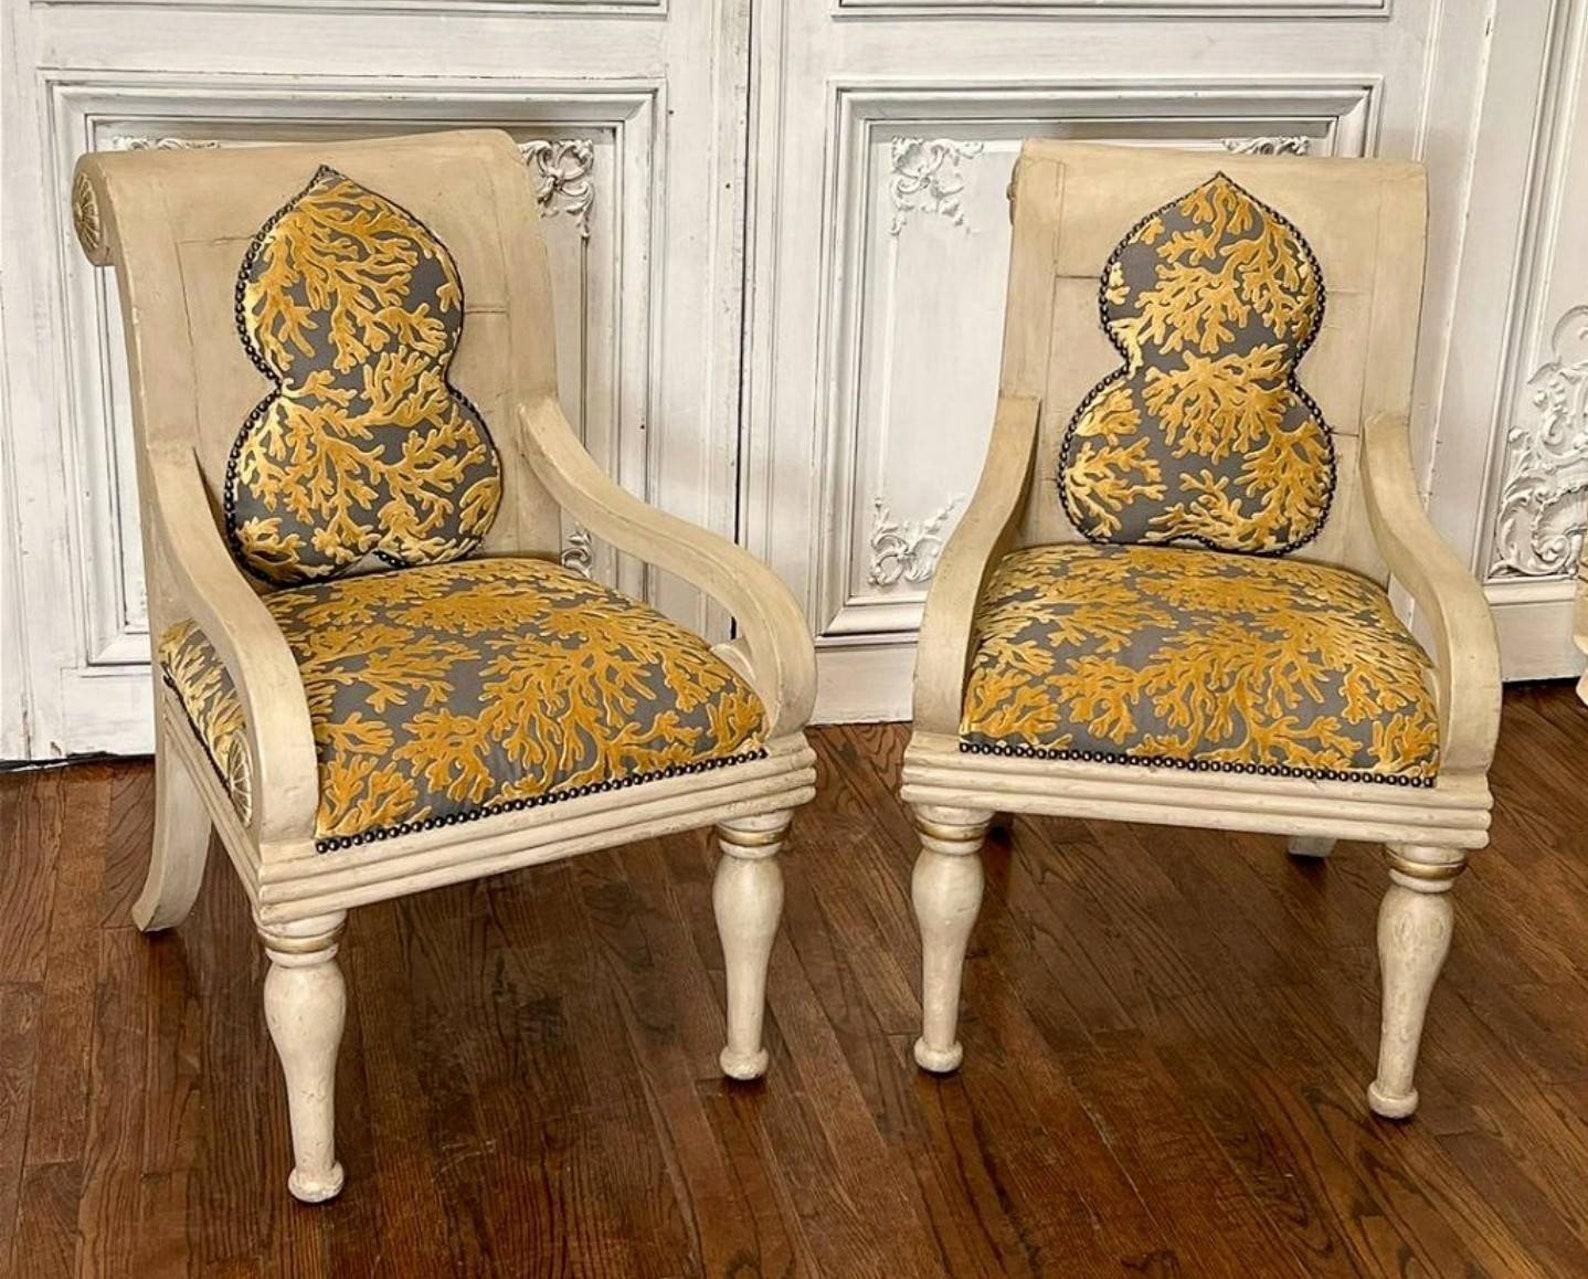  Pair of Vintage Italian Scroll Back Armchairs In Good Condition For Sale In Forney, TX